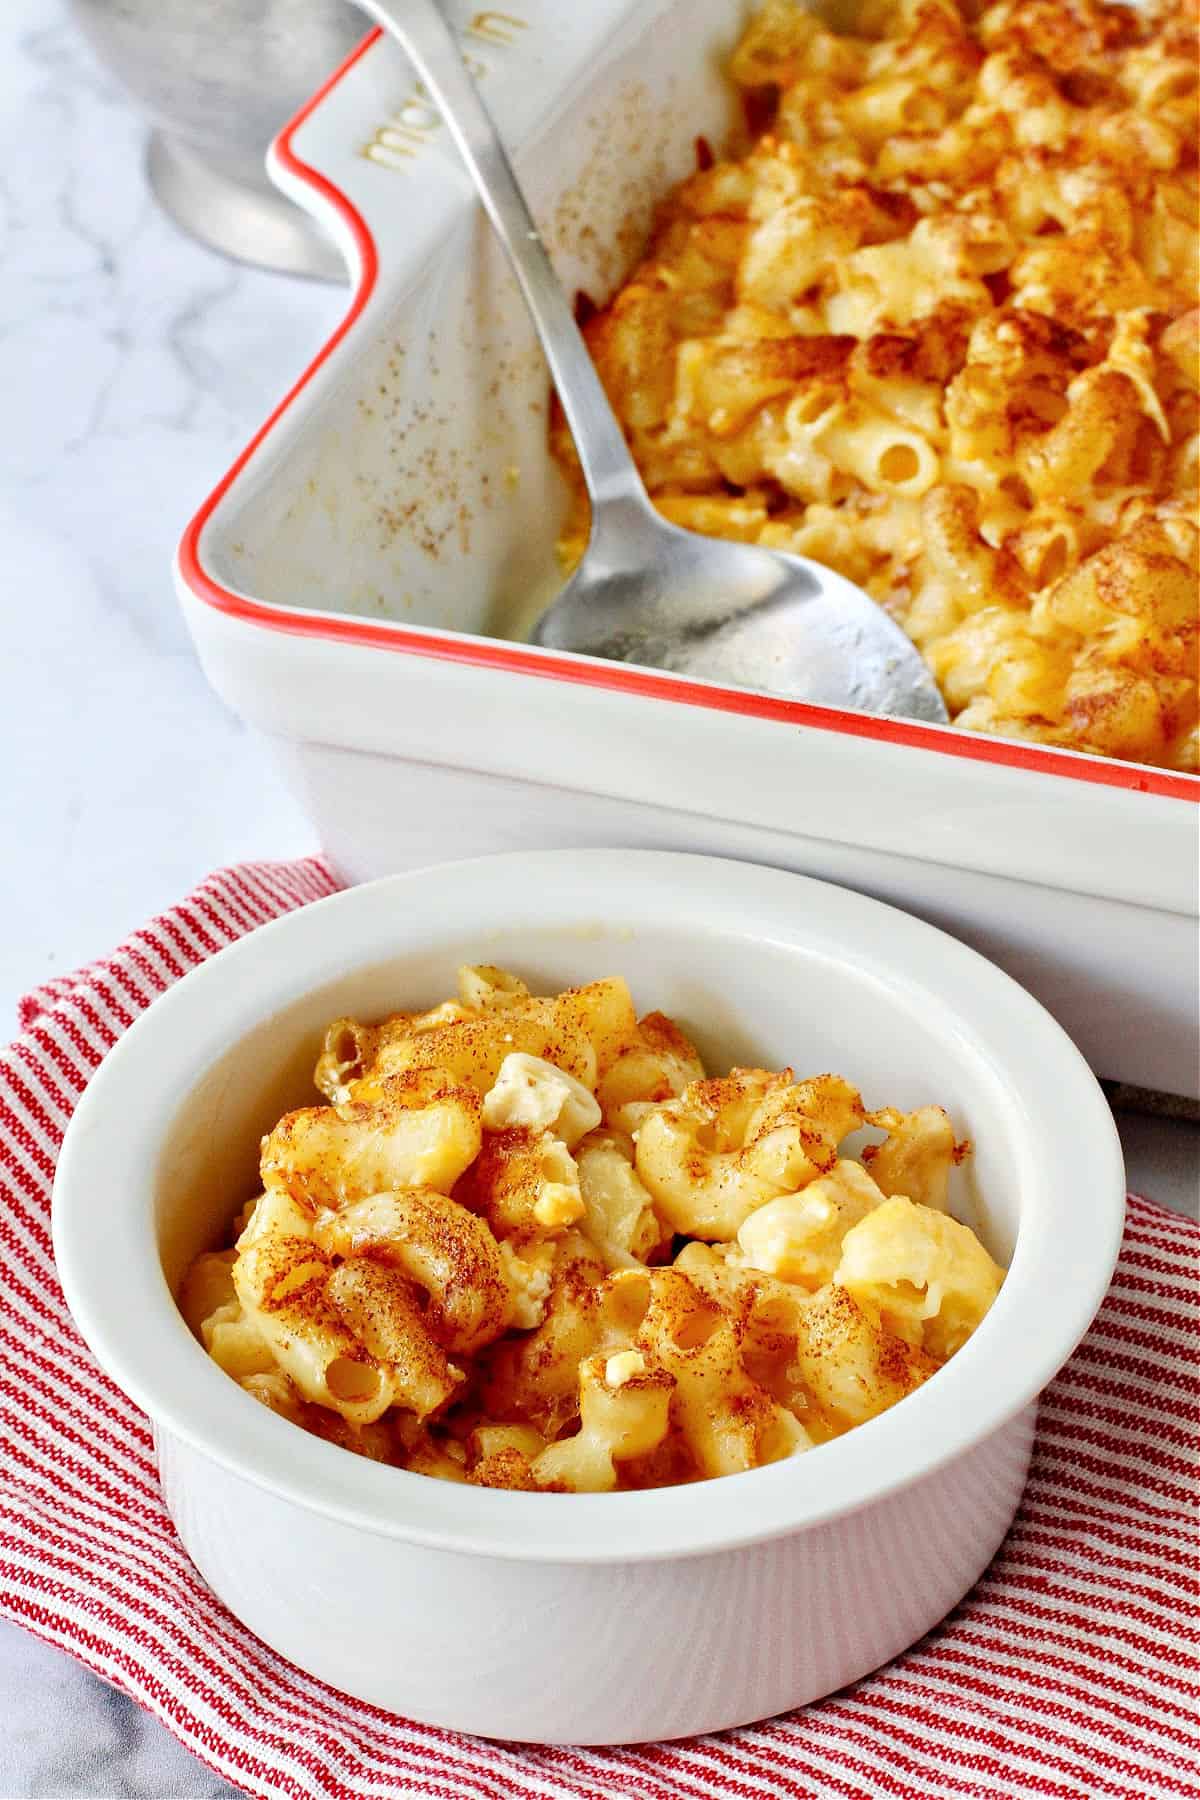 Baked Macaroni and Cheese serving in a white bowl.